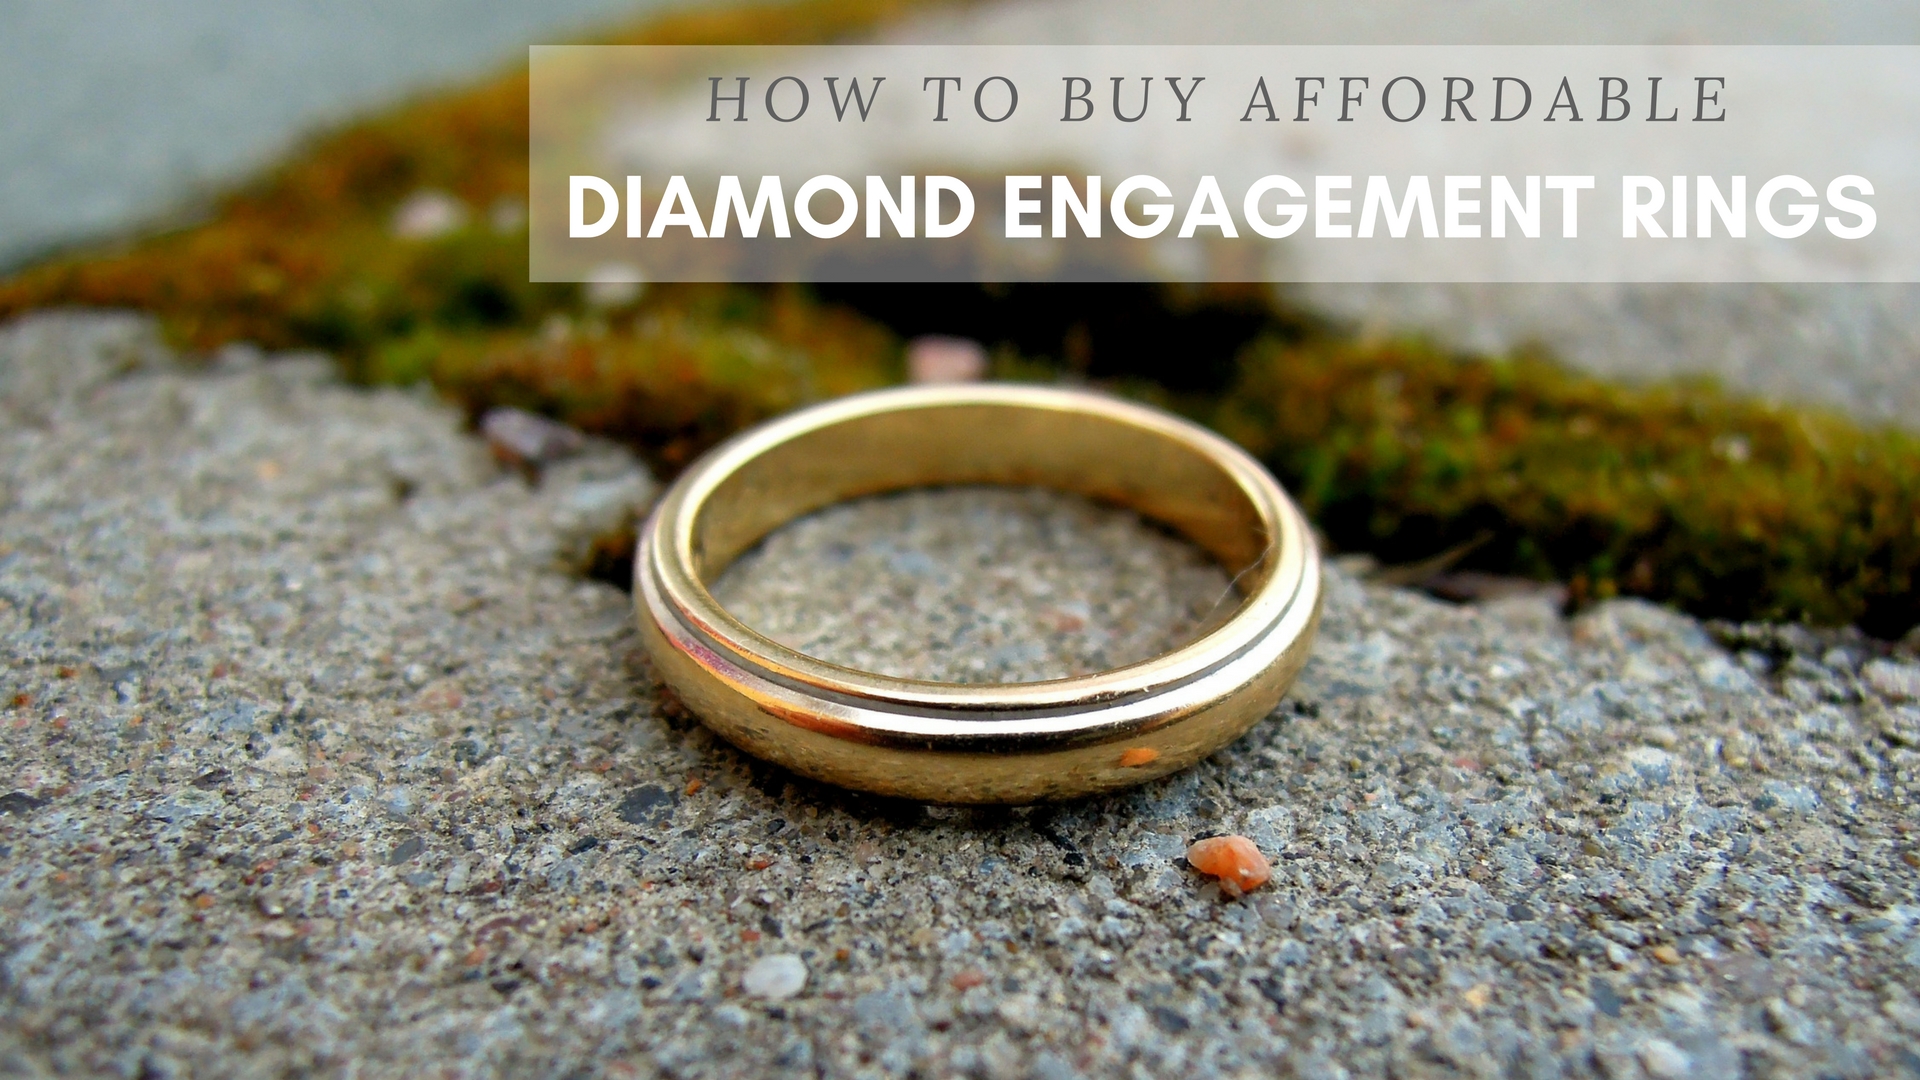 How To Buy Affordable Diamond Engagement Rings - dazzlingRock